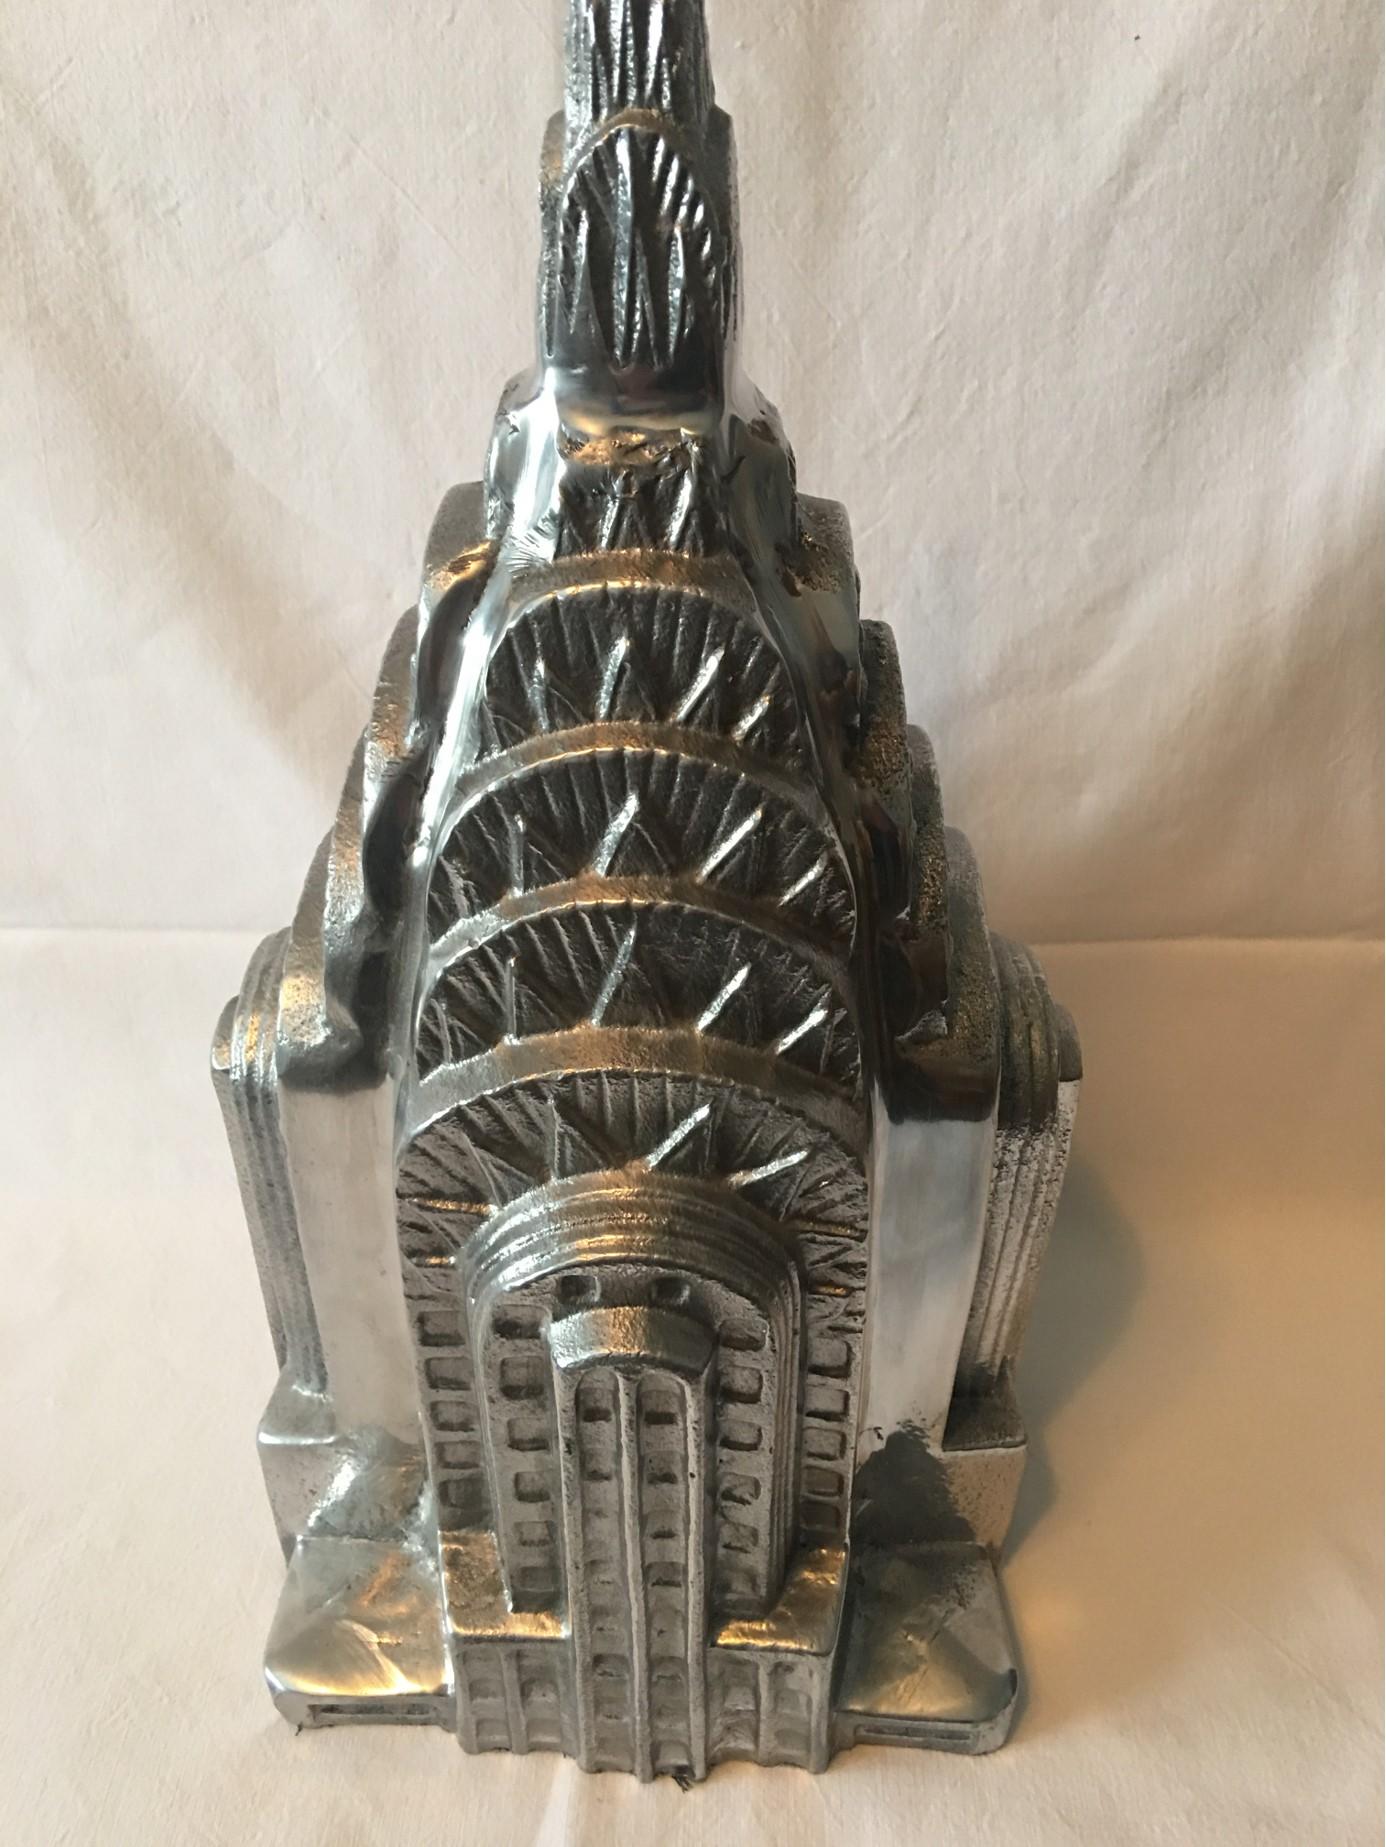 Late 20th Century  New York Souvenir Chrysler Building Top Made of Aluminum from the 1970s